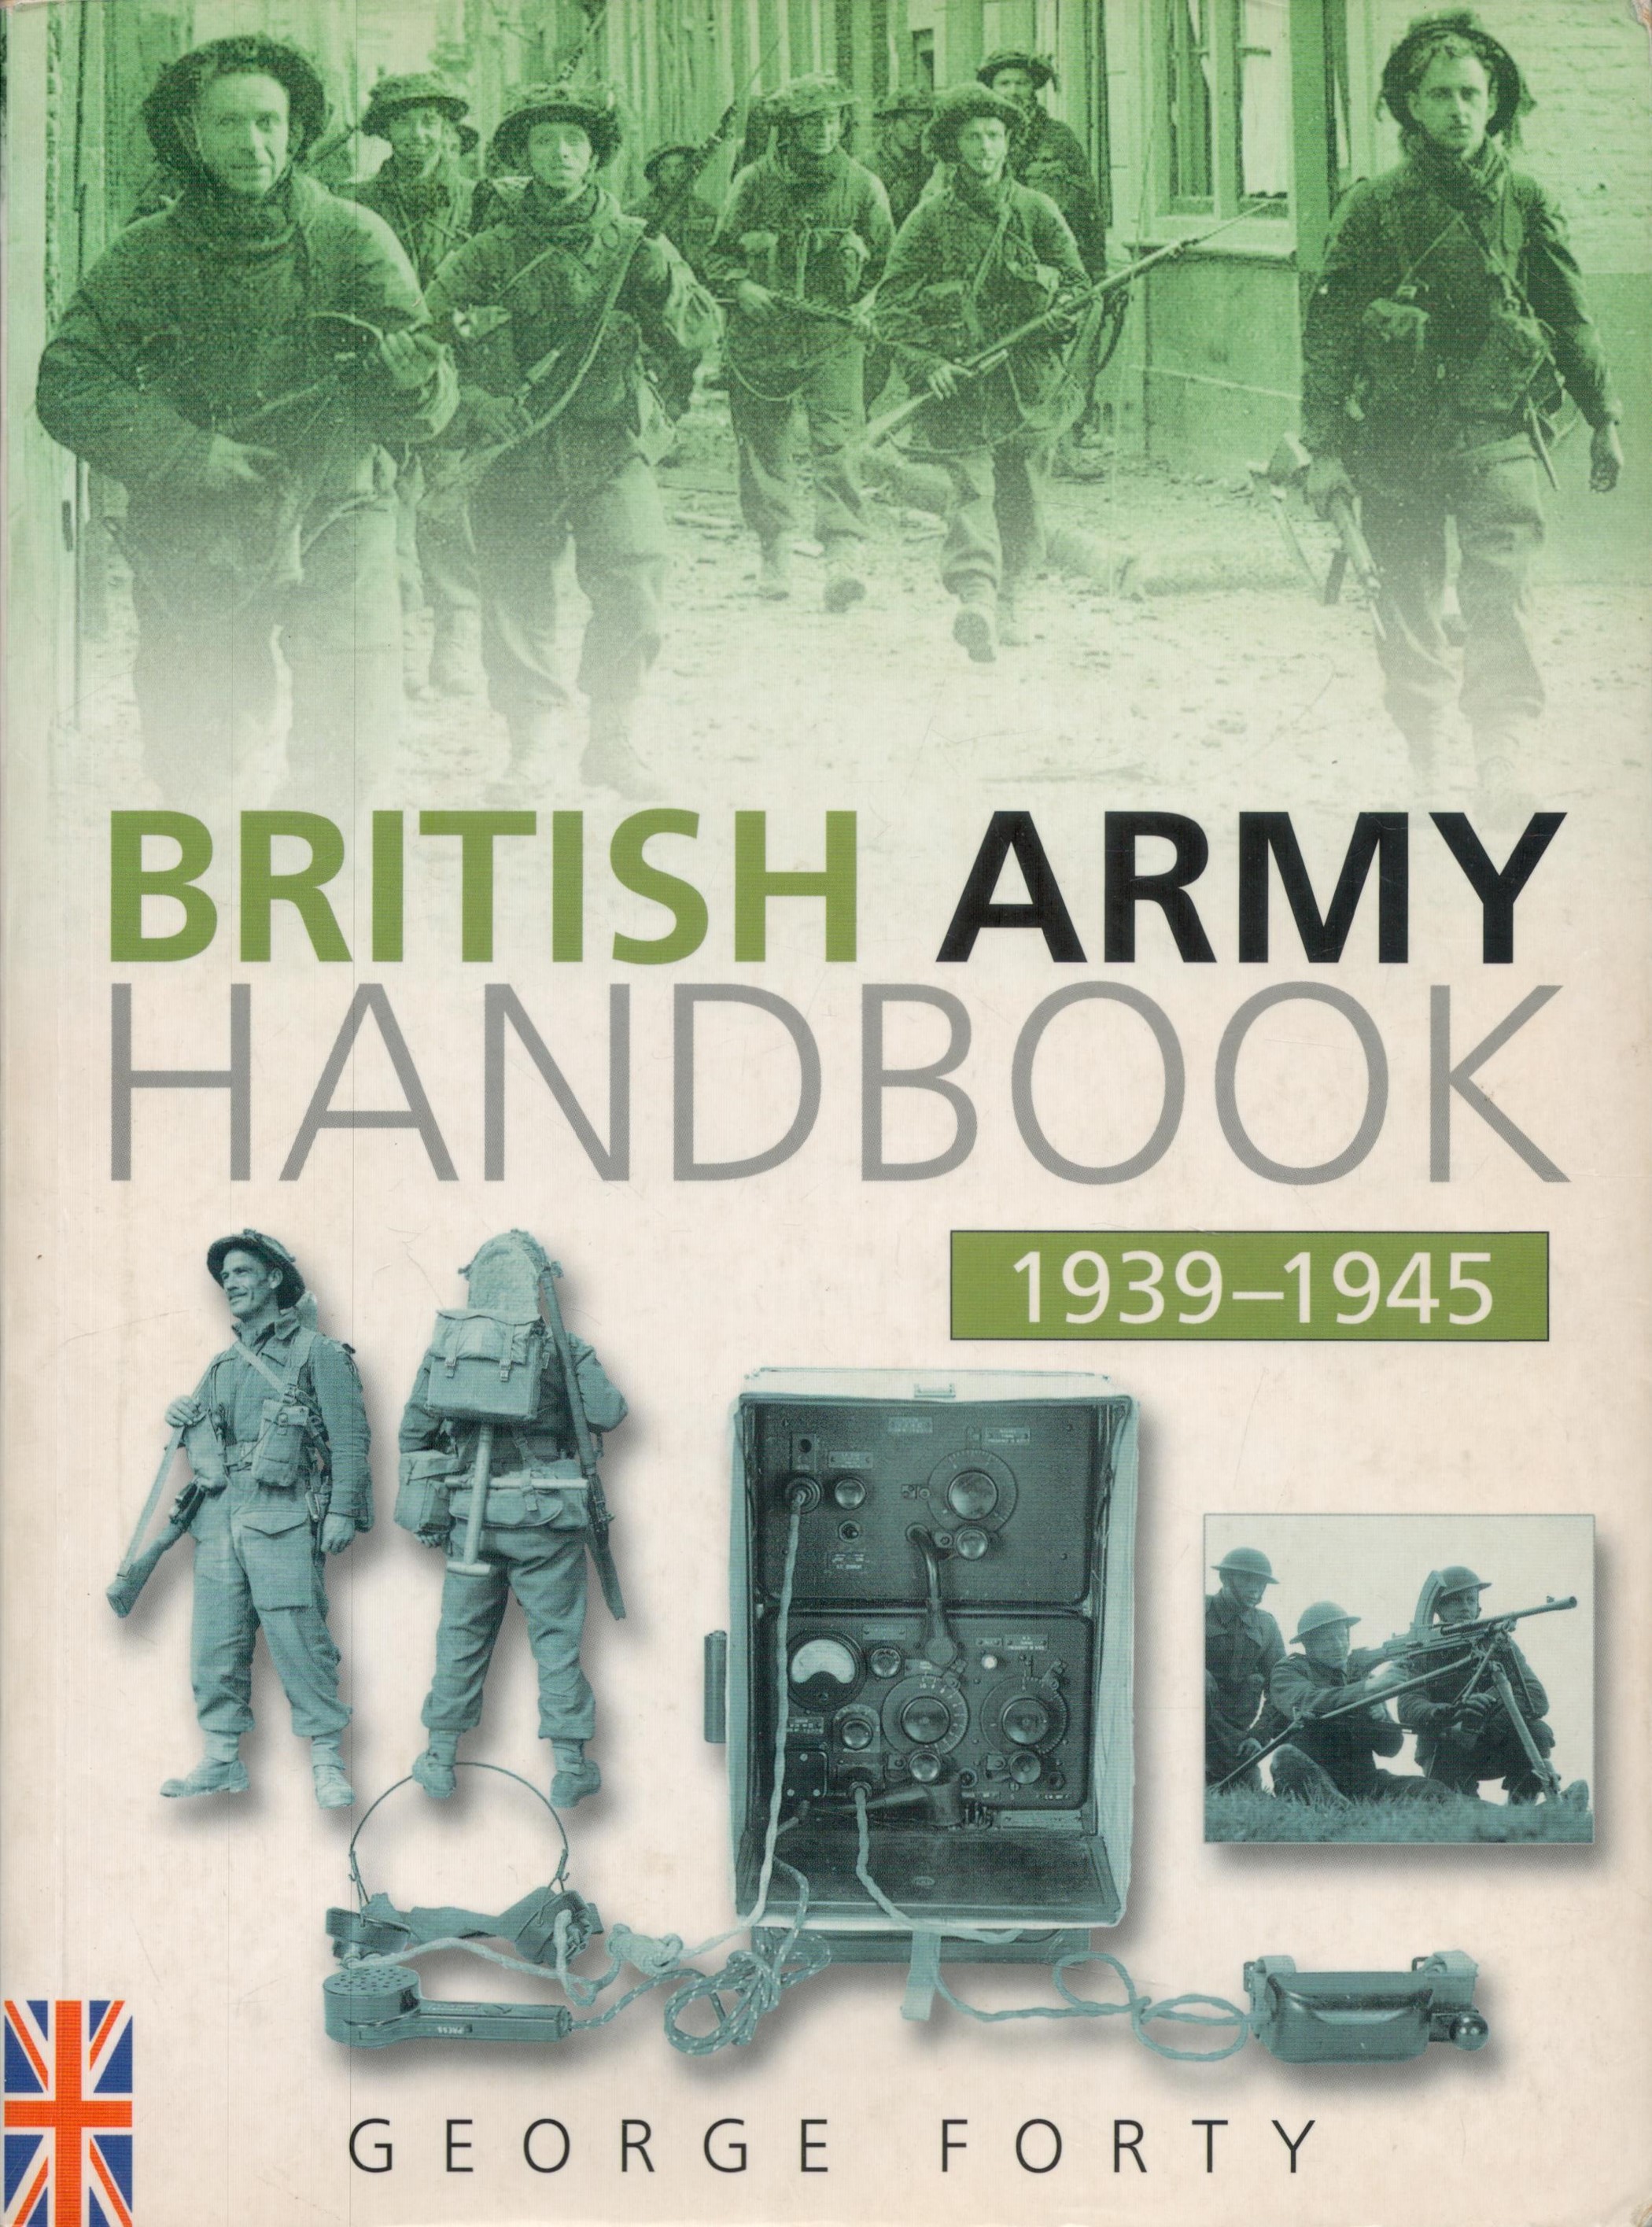 WW2. 39 Soldiers Signed British Army Handbook by George Forty. Published in 2002. Showing Early